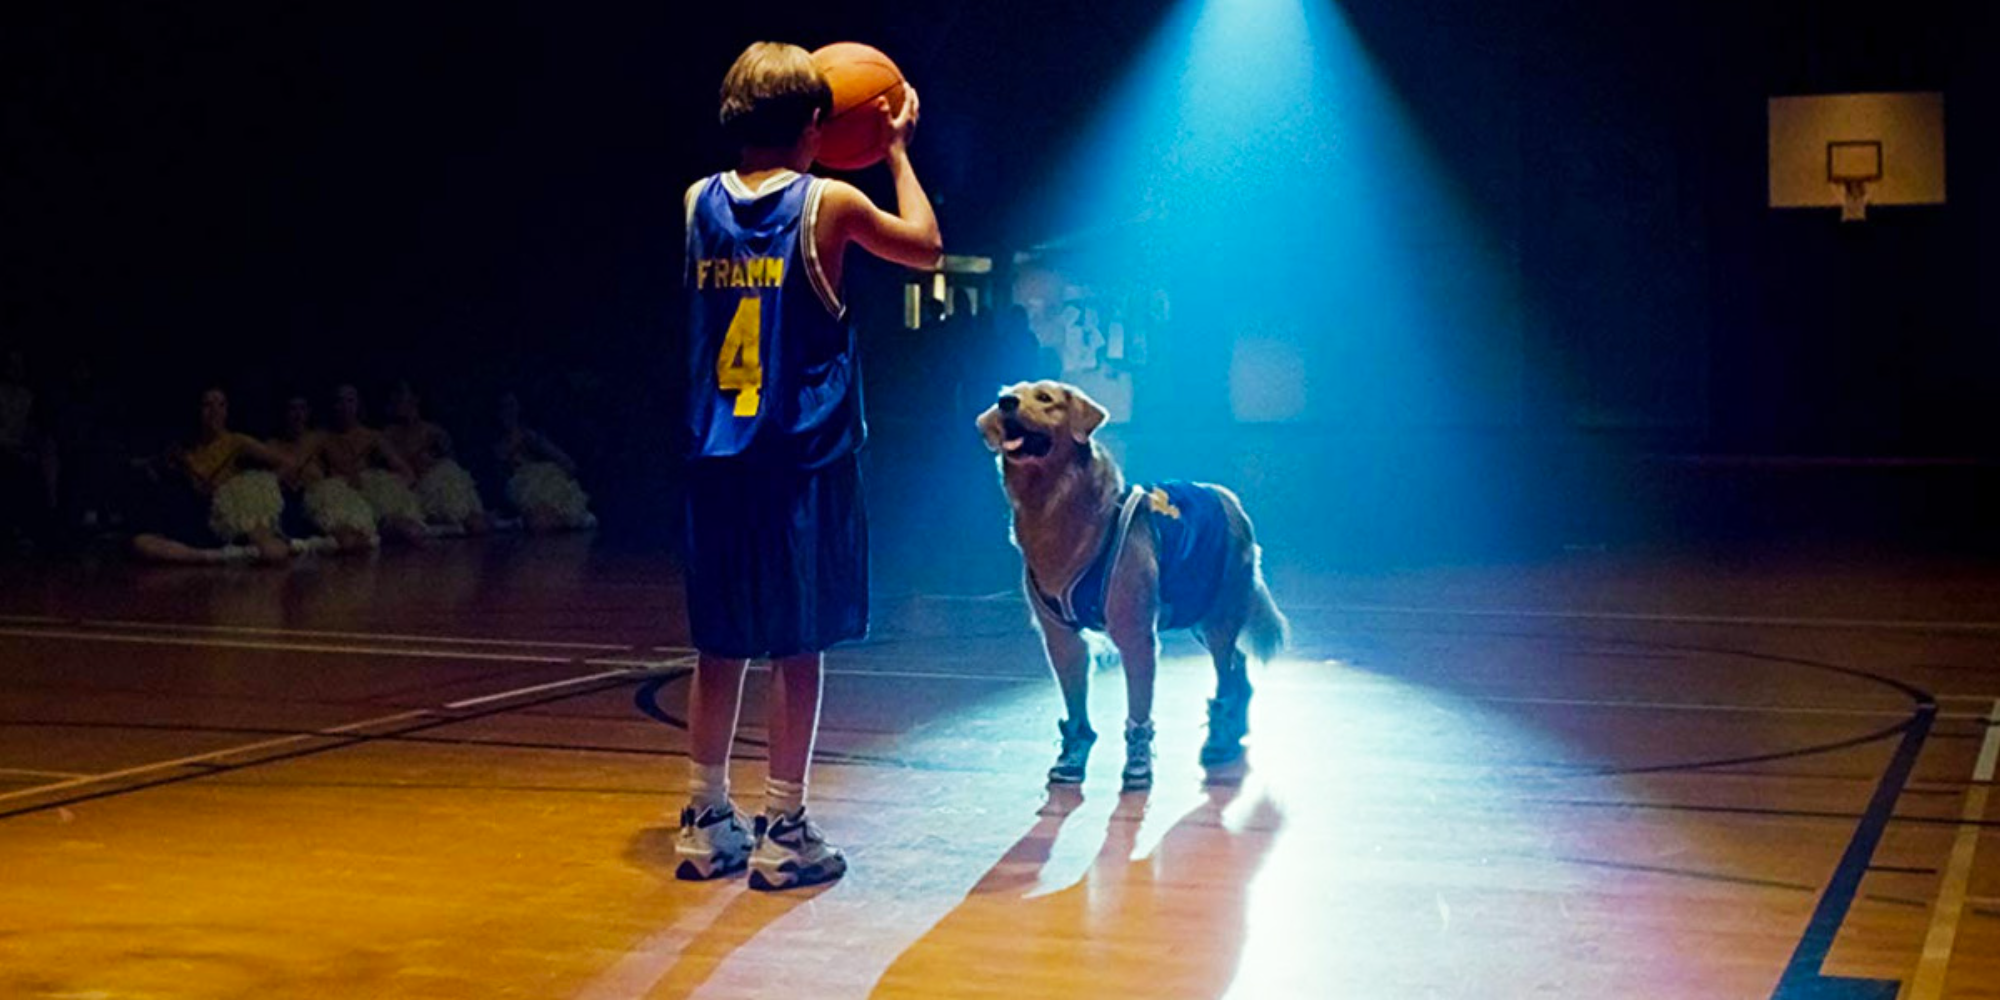 Josh and Buddy take the court at halftime in Airbud